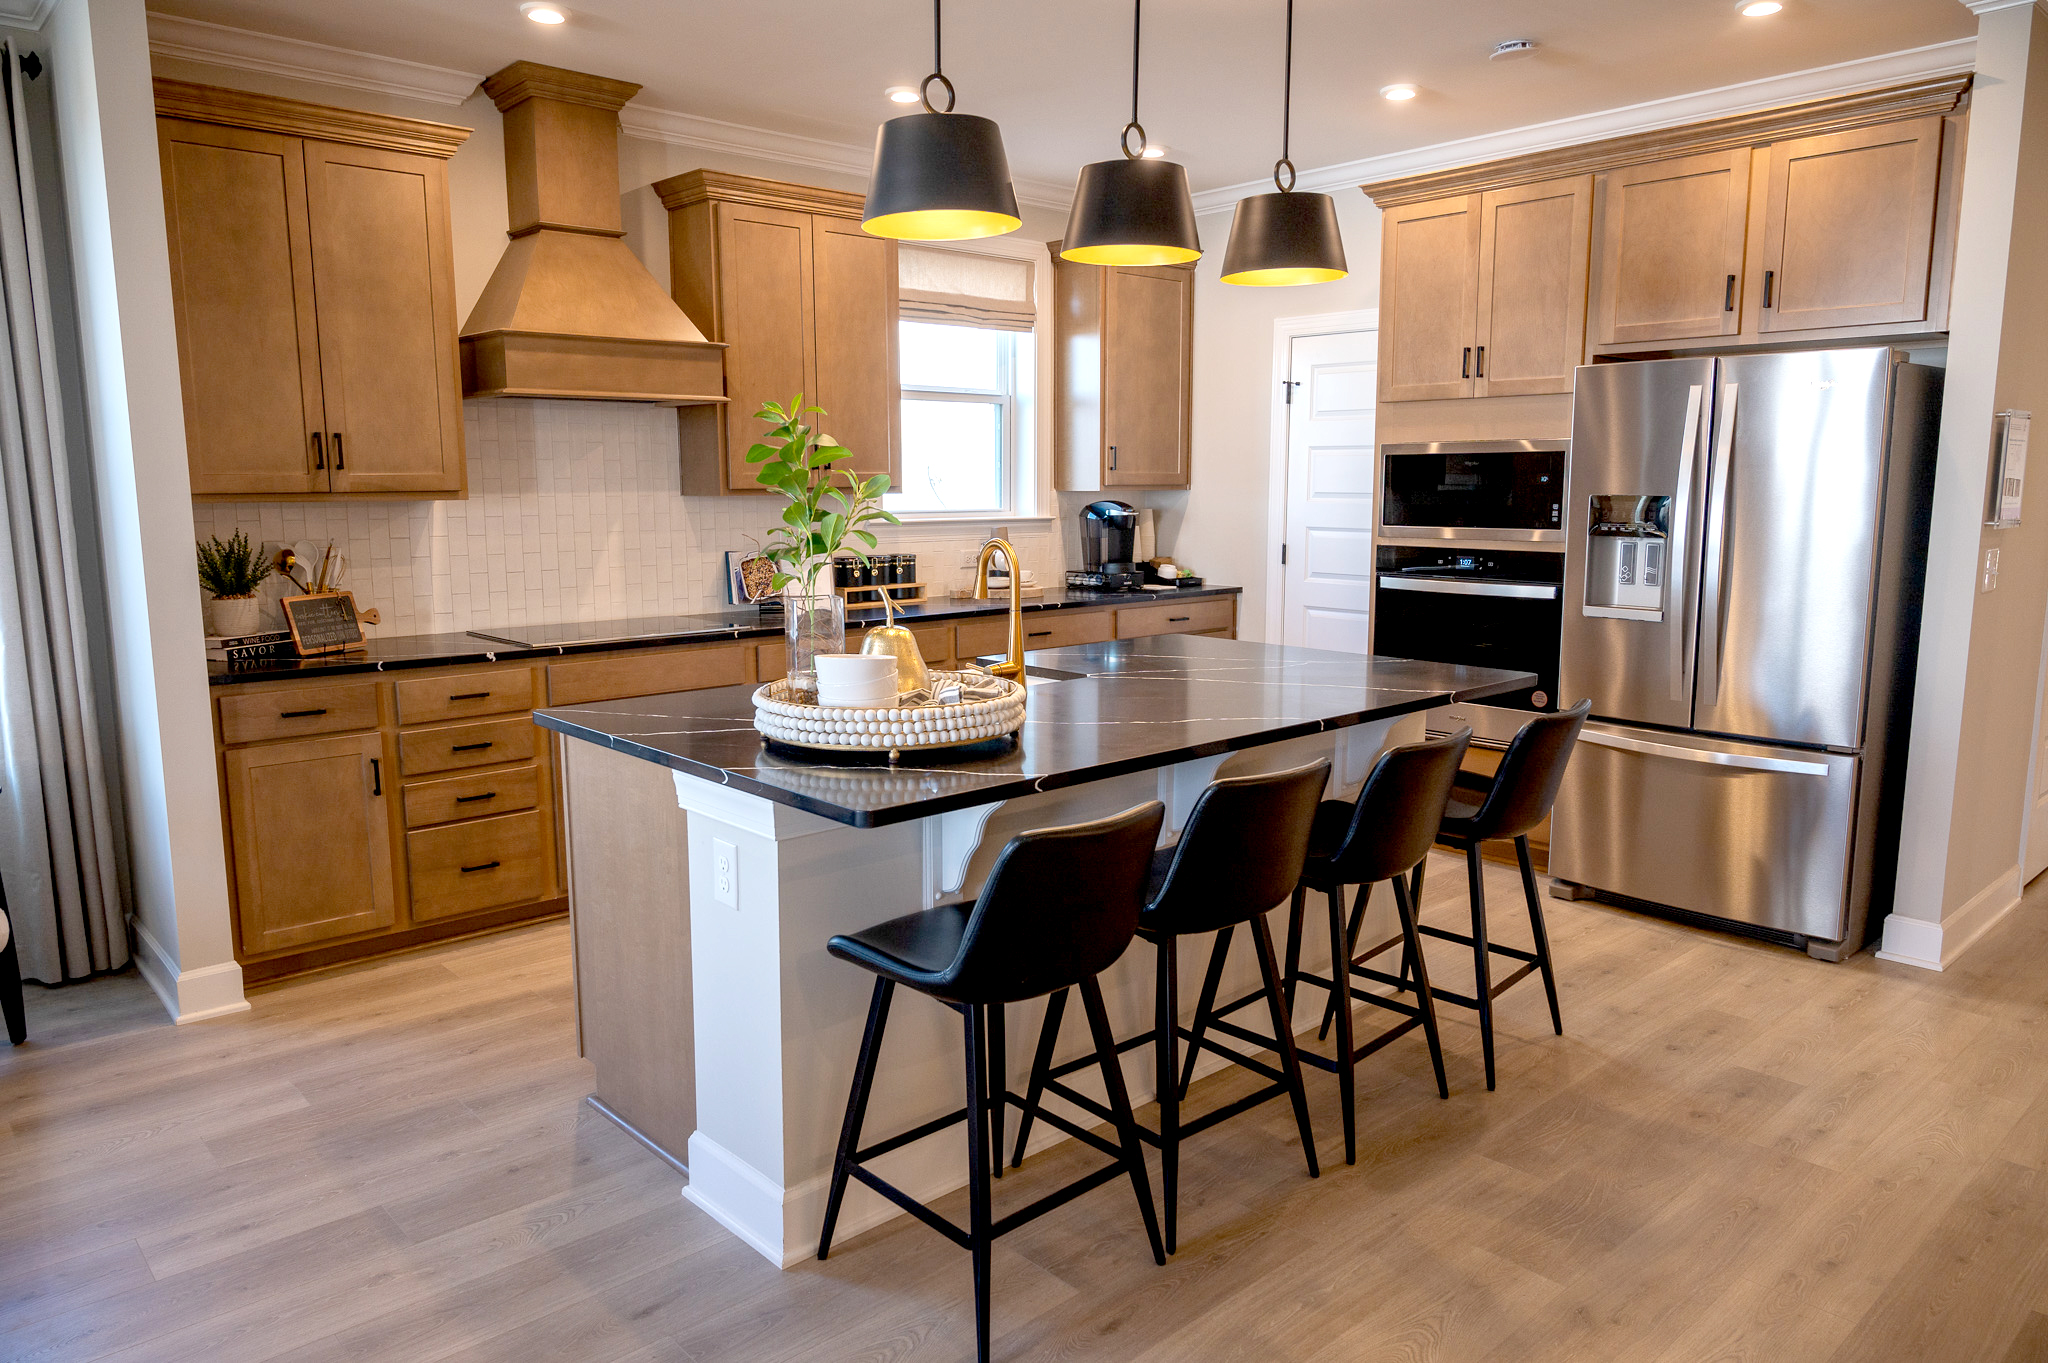 New homes at Windtree in Nashville include induction cooking technology